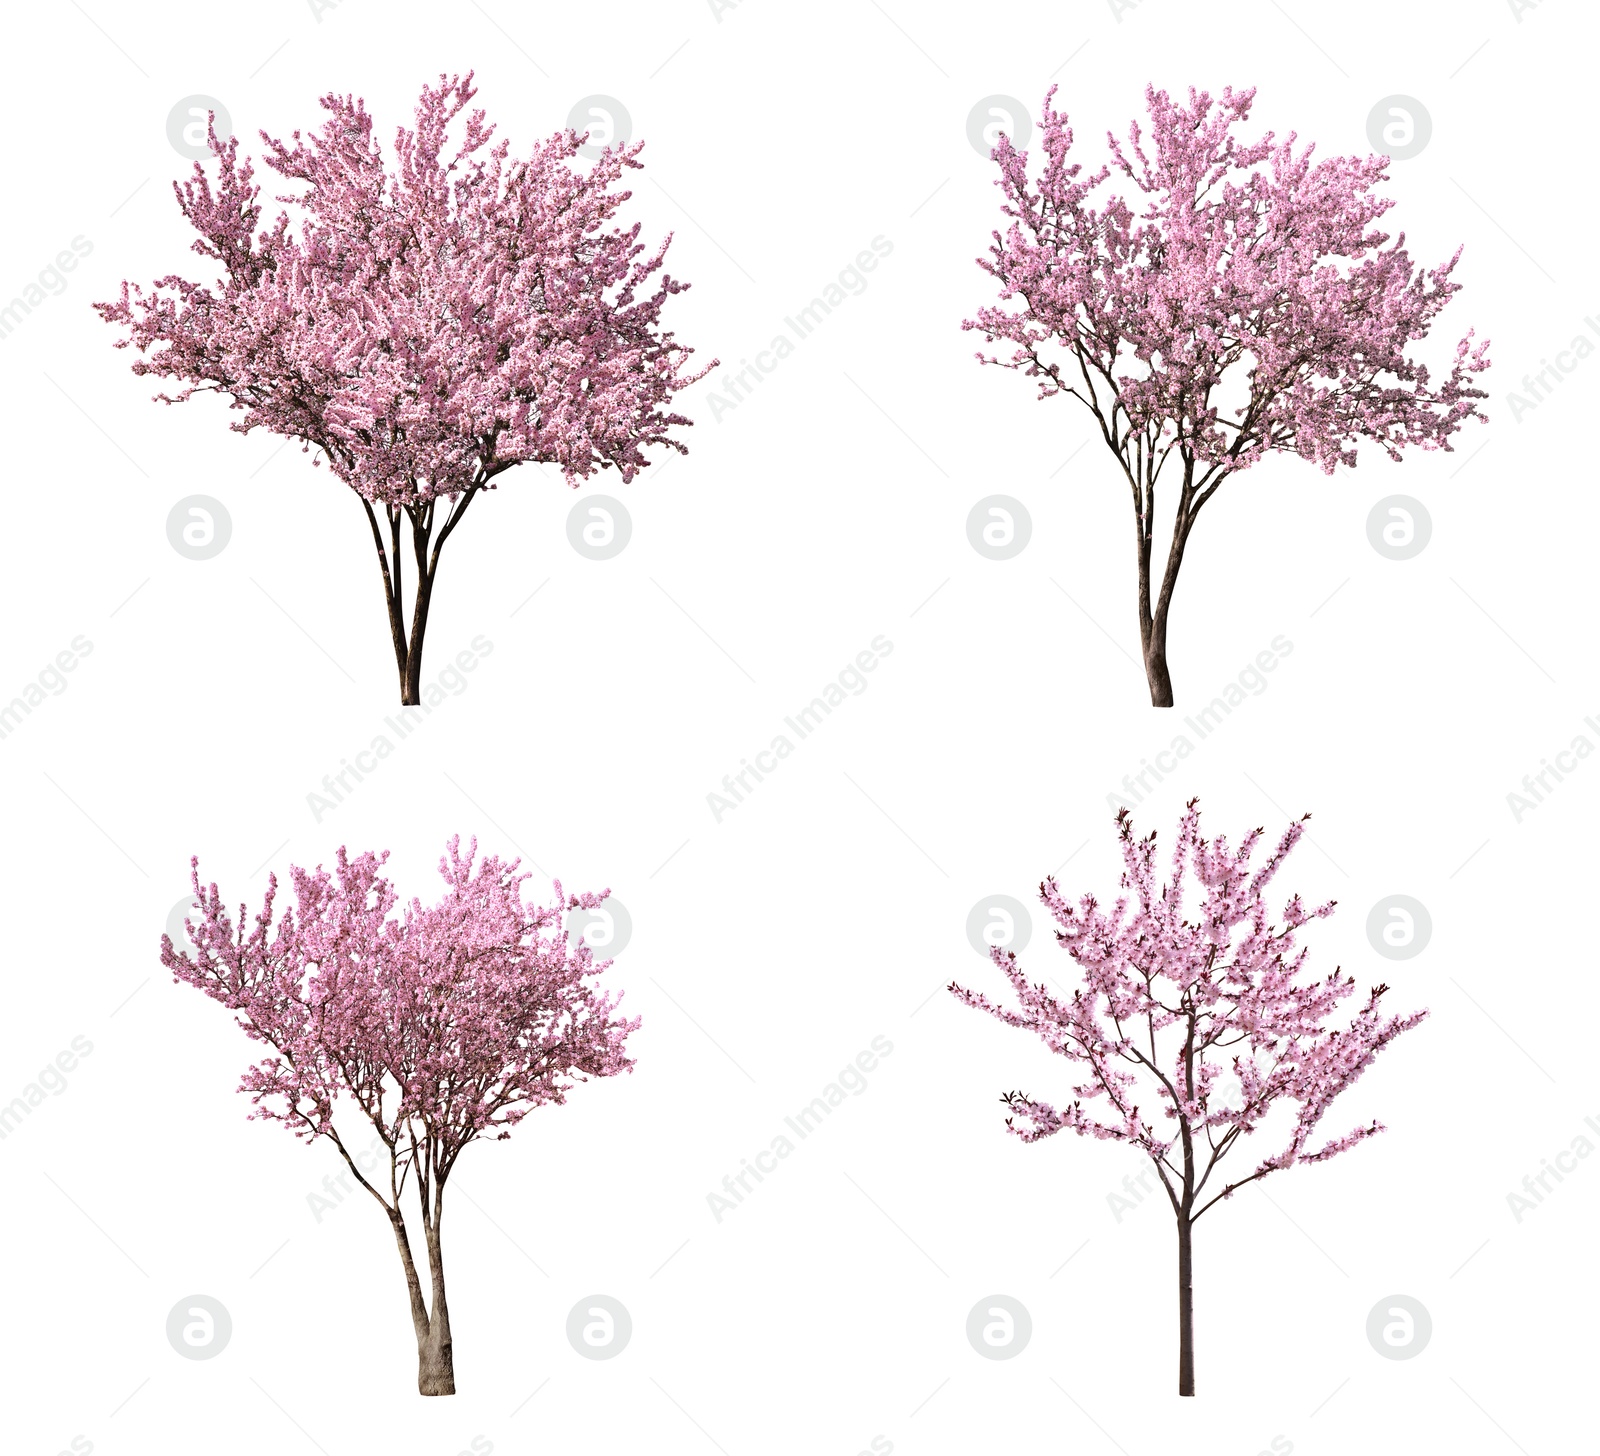 Image of Beautiful blossoming sakura trees on white background, collage 